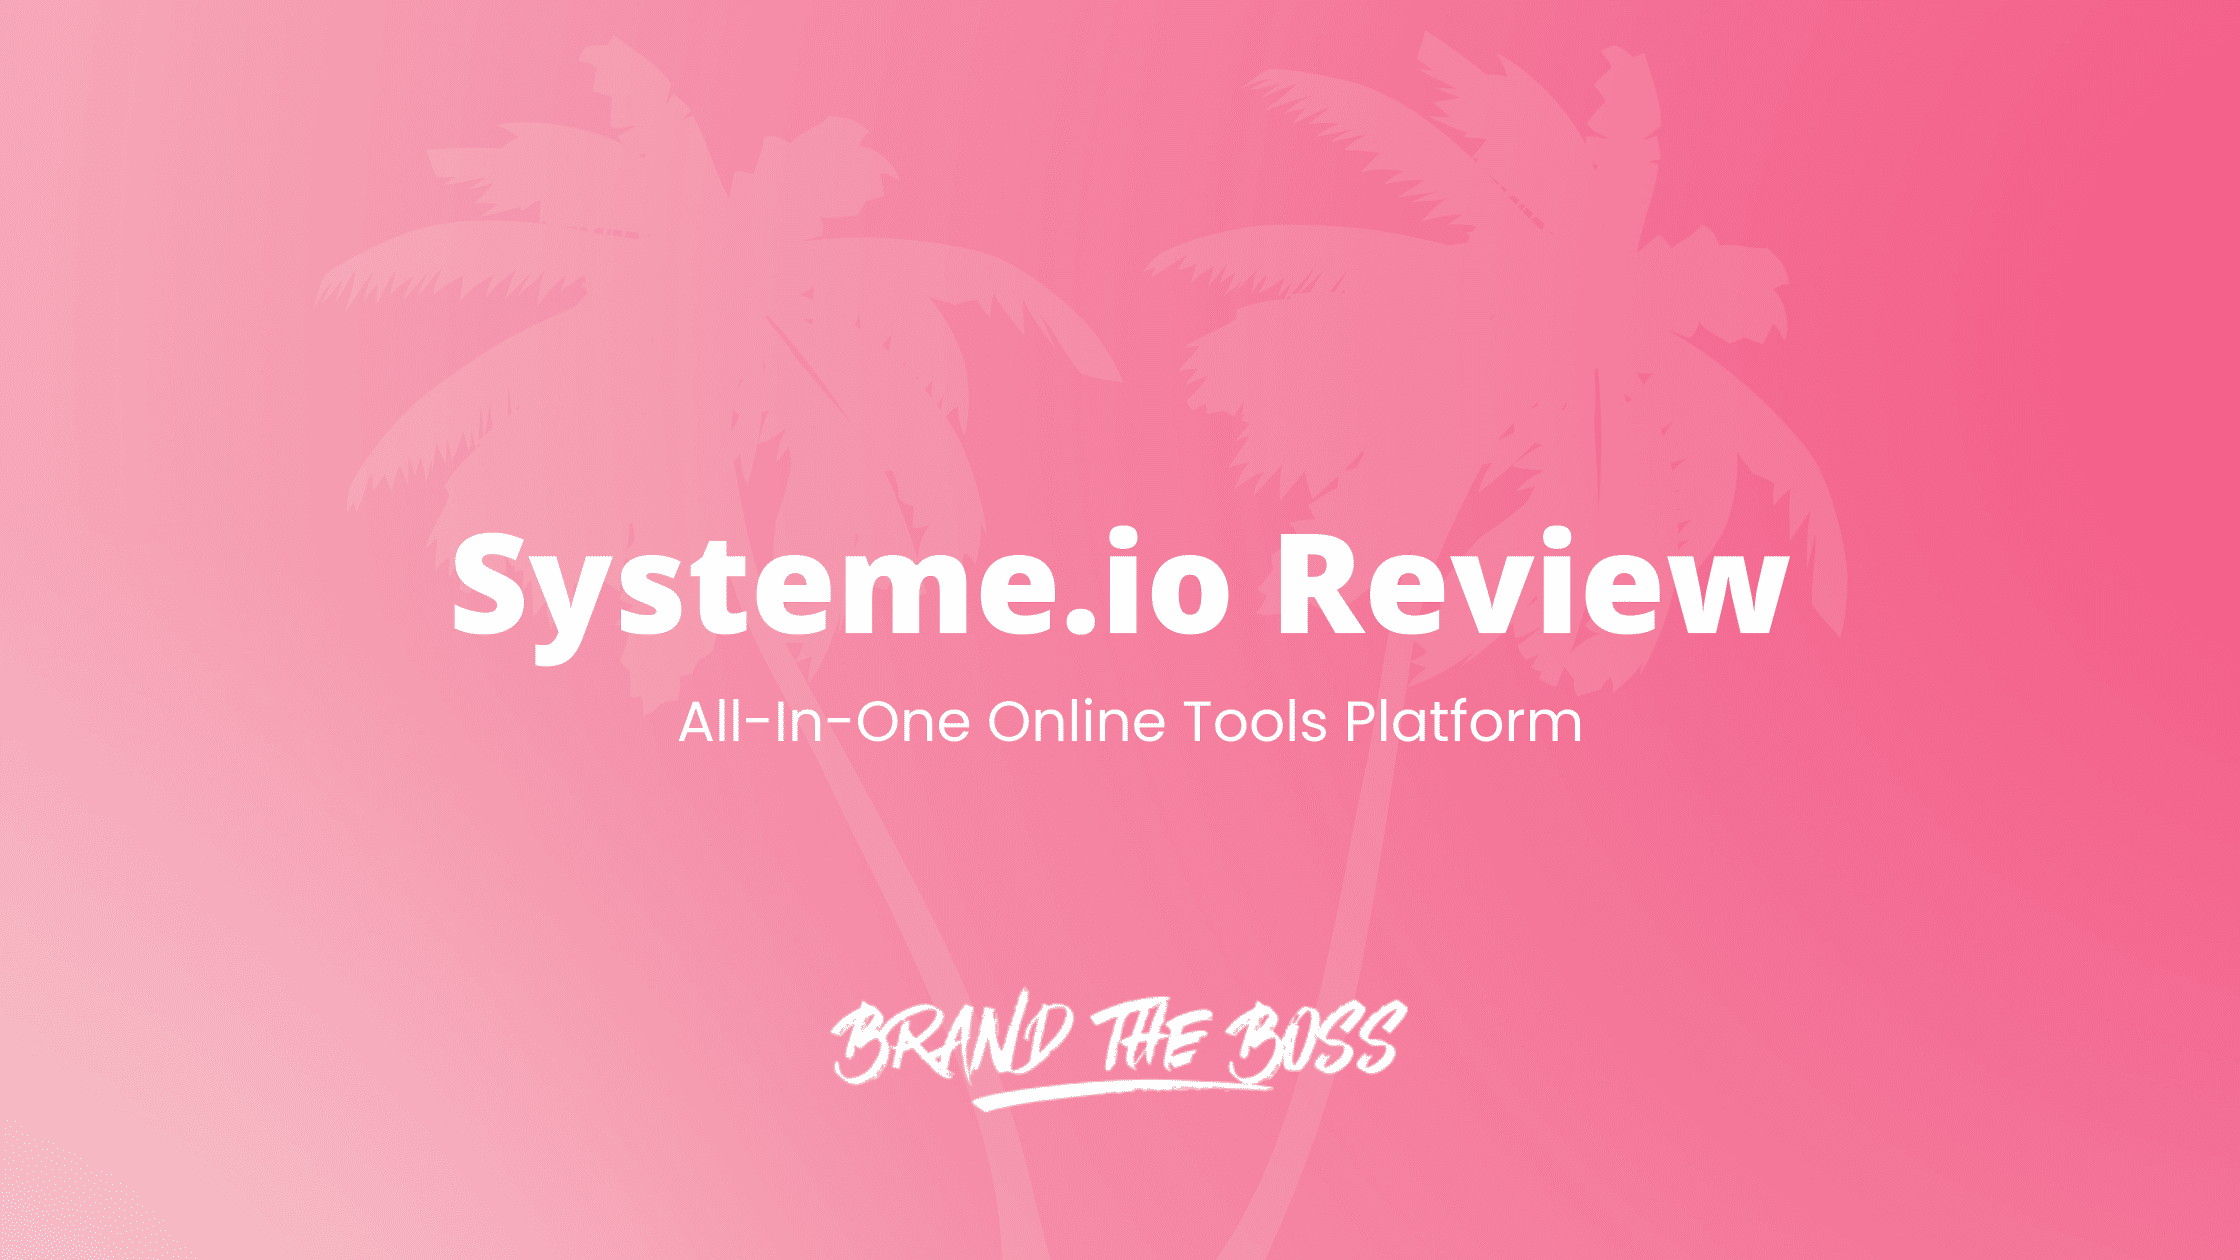 systeme.io review cover image